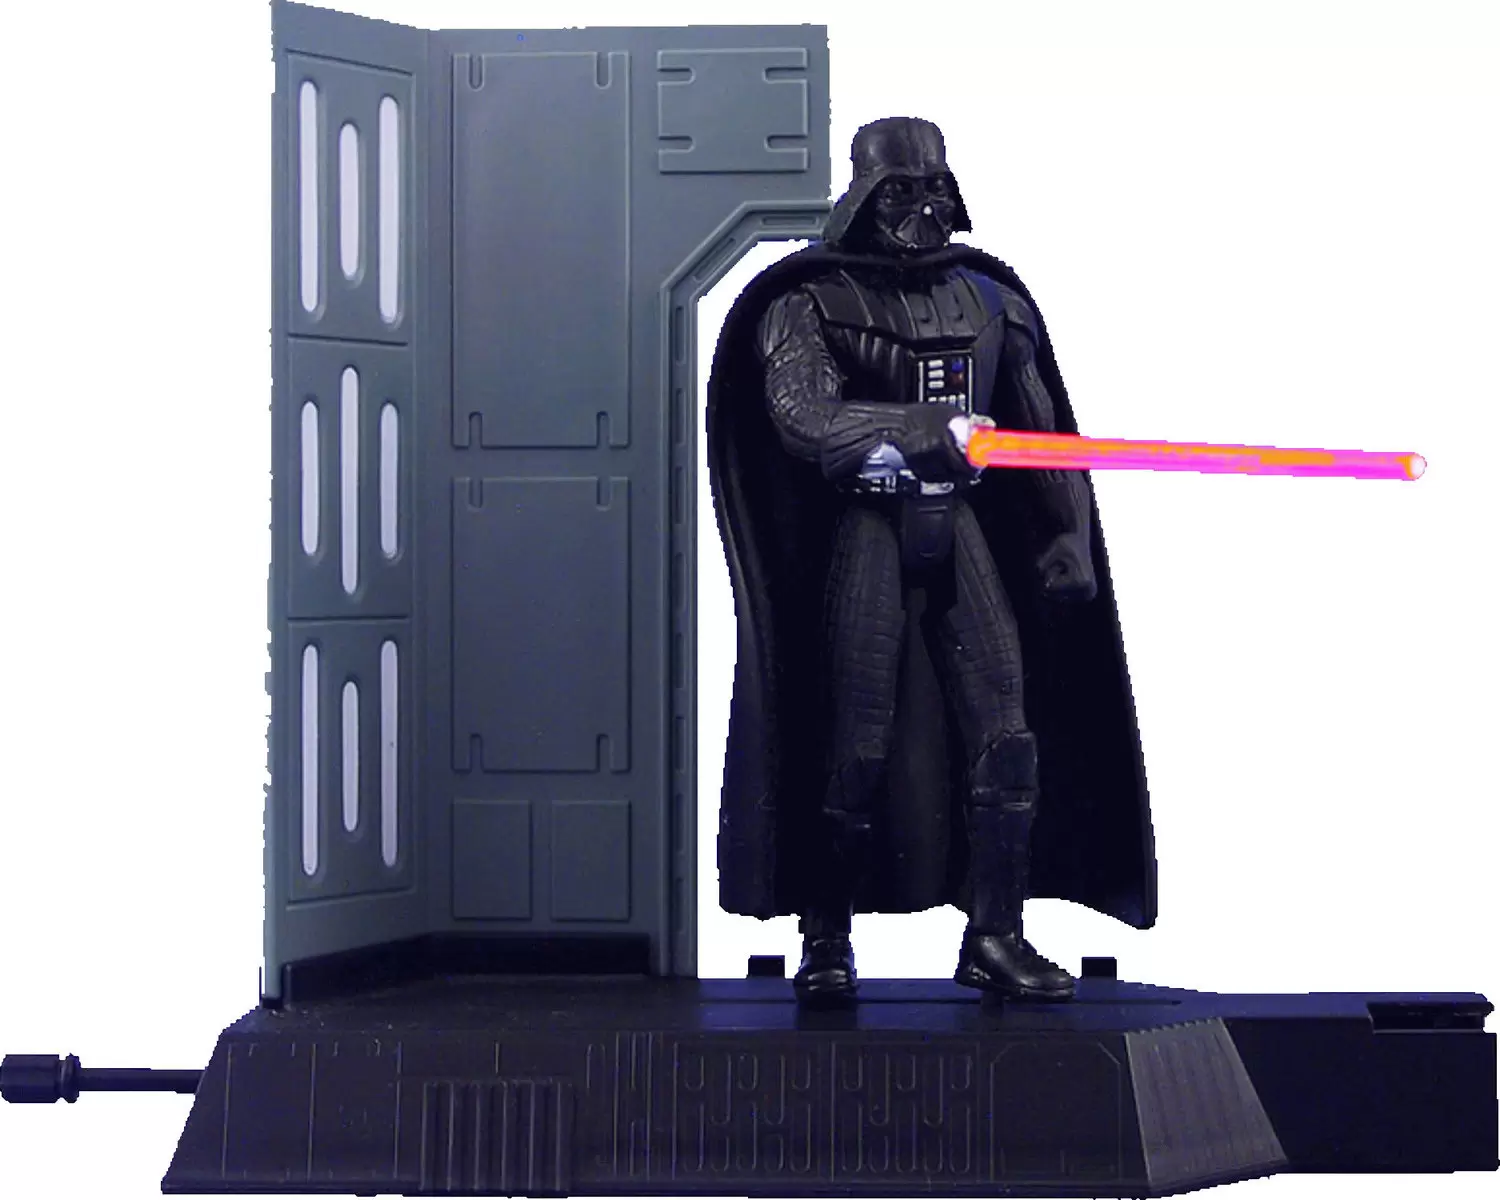 Power of the Force 2 - Darth Vader - Power FX